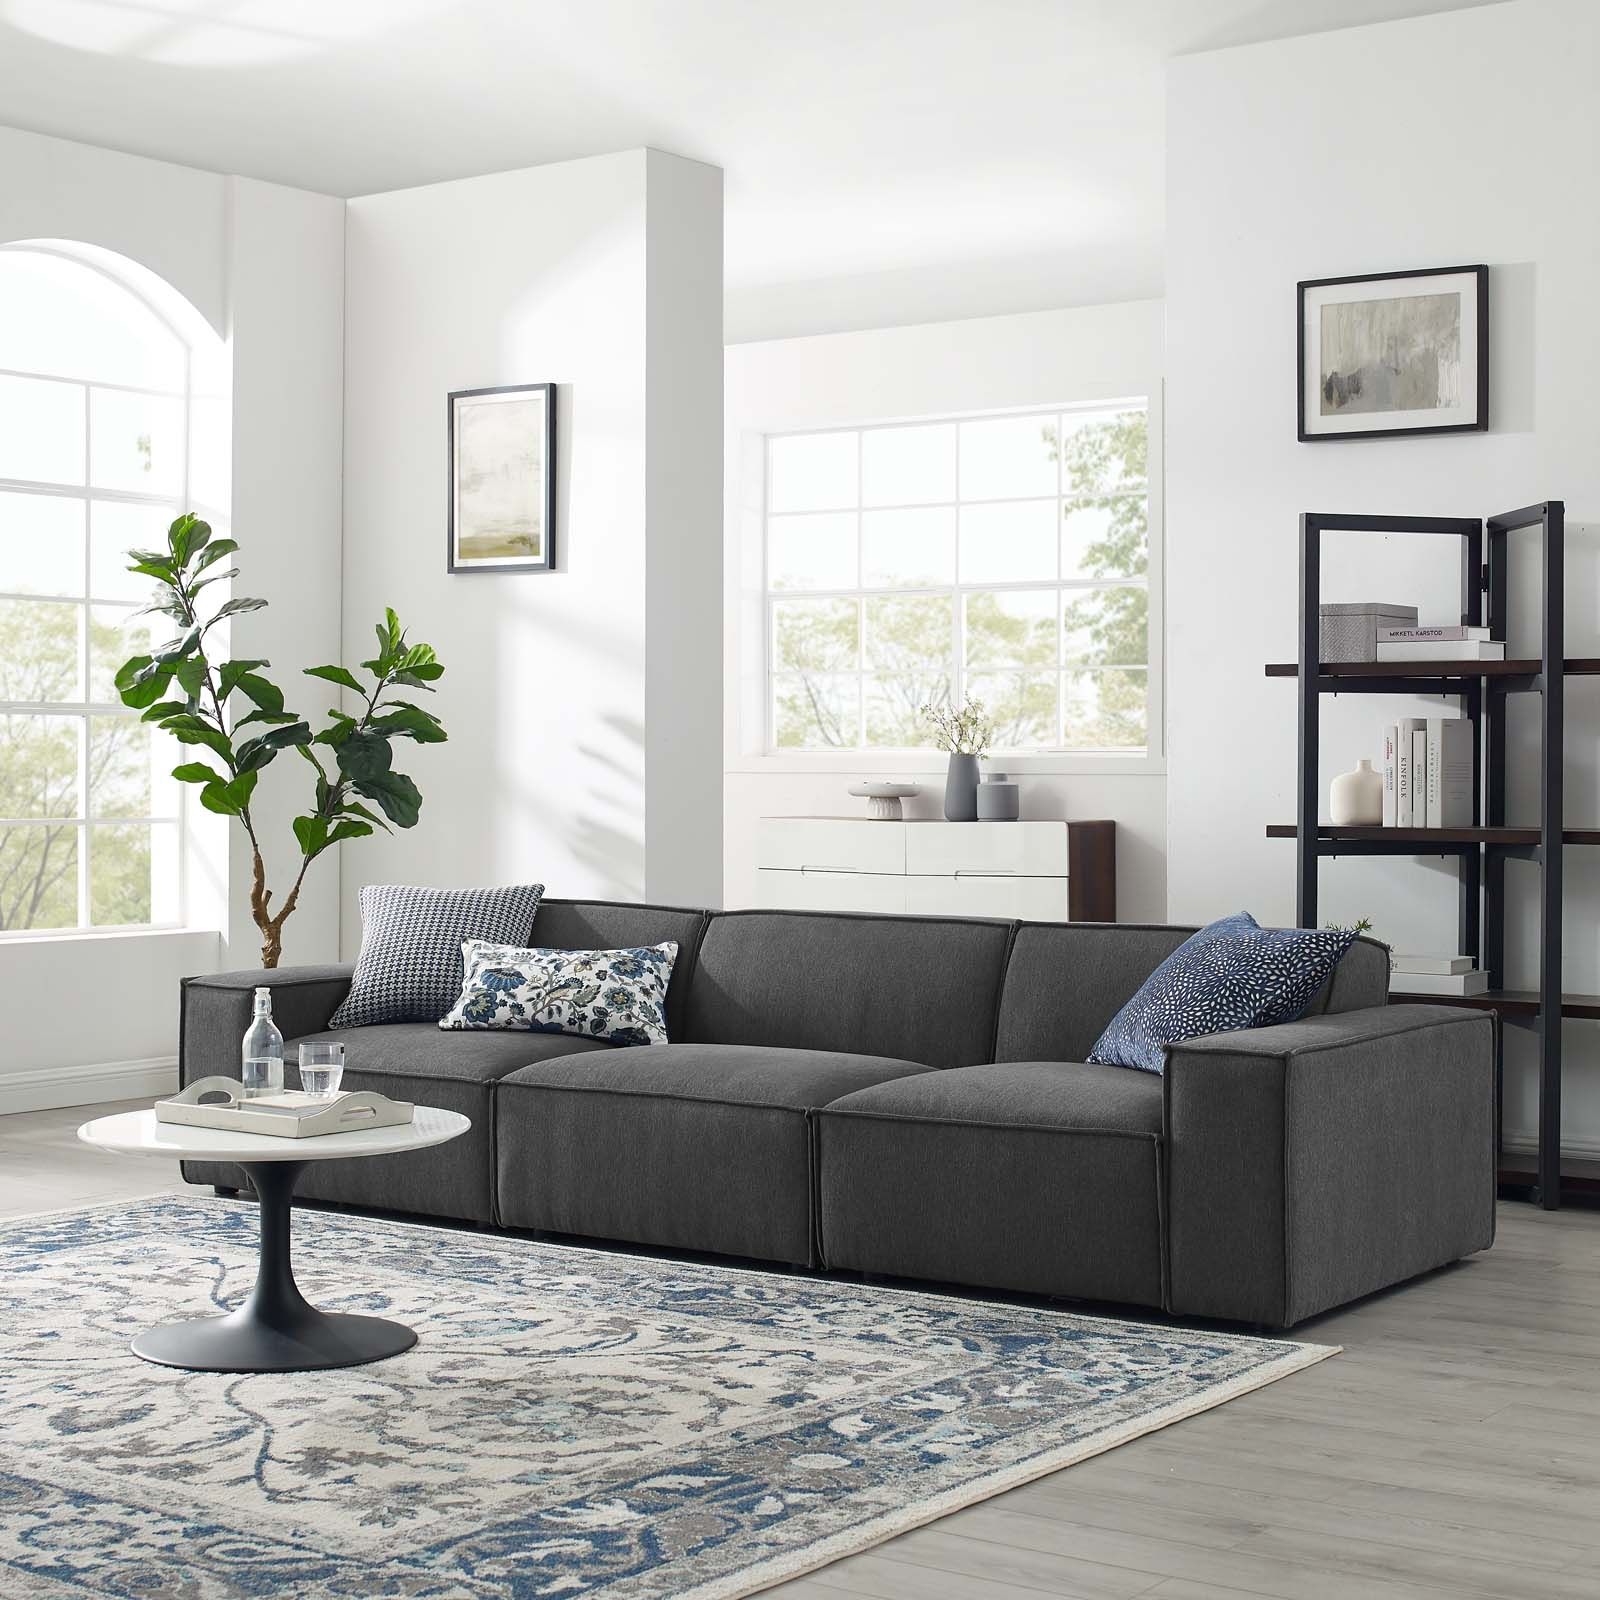 Restore 3 Piece Sectional Sofa In Charcoal – Hyme Furniture Within 3 Piece Console Tables (View 10 of 20)